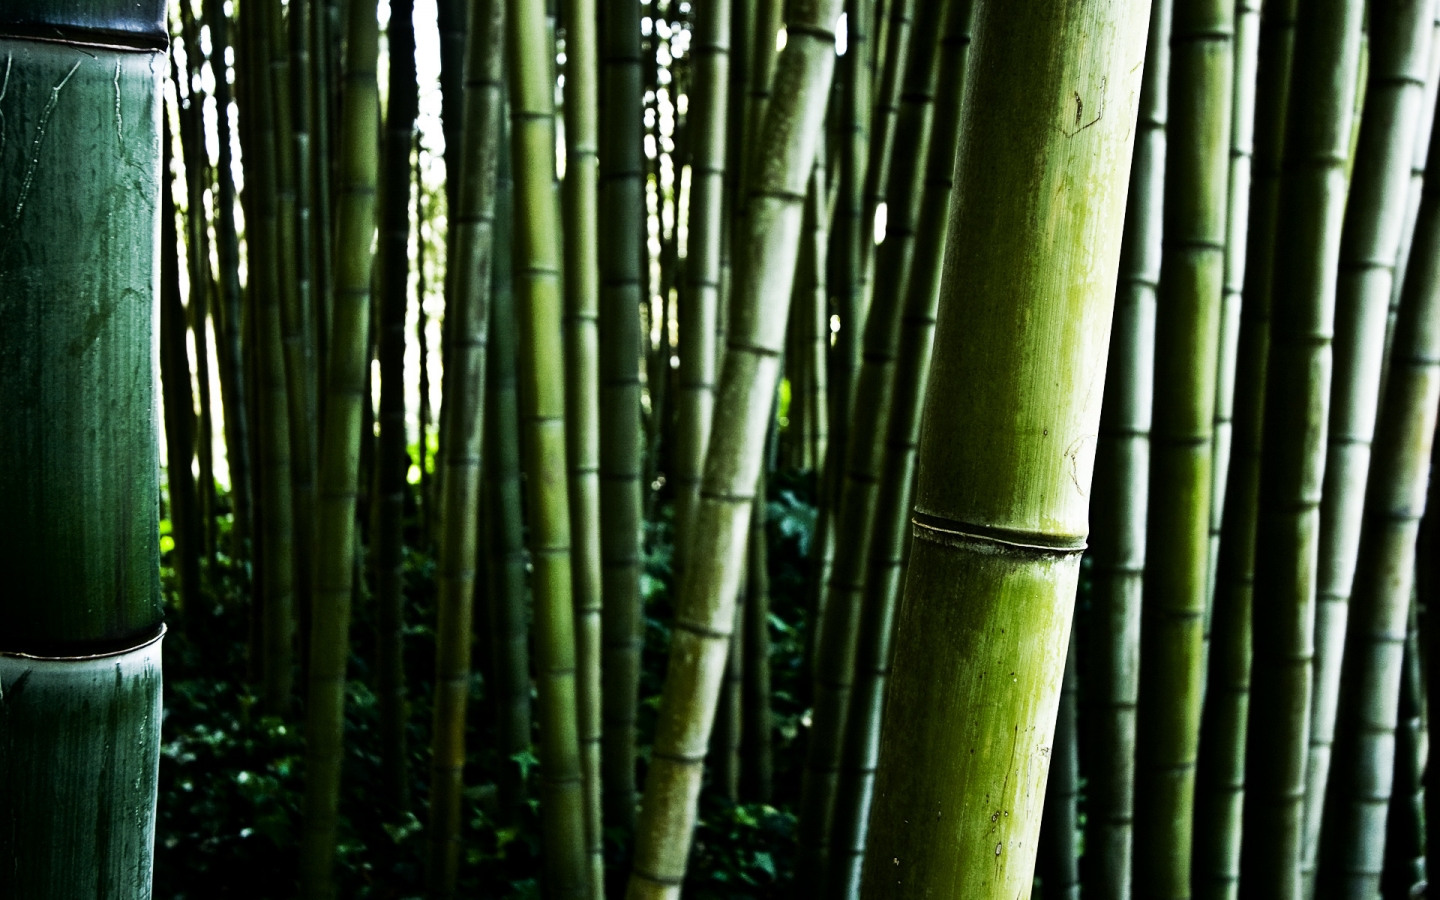 Bamboo stalks for 1440 x 900 widescreen resolution